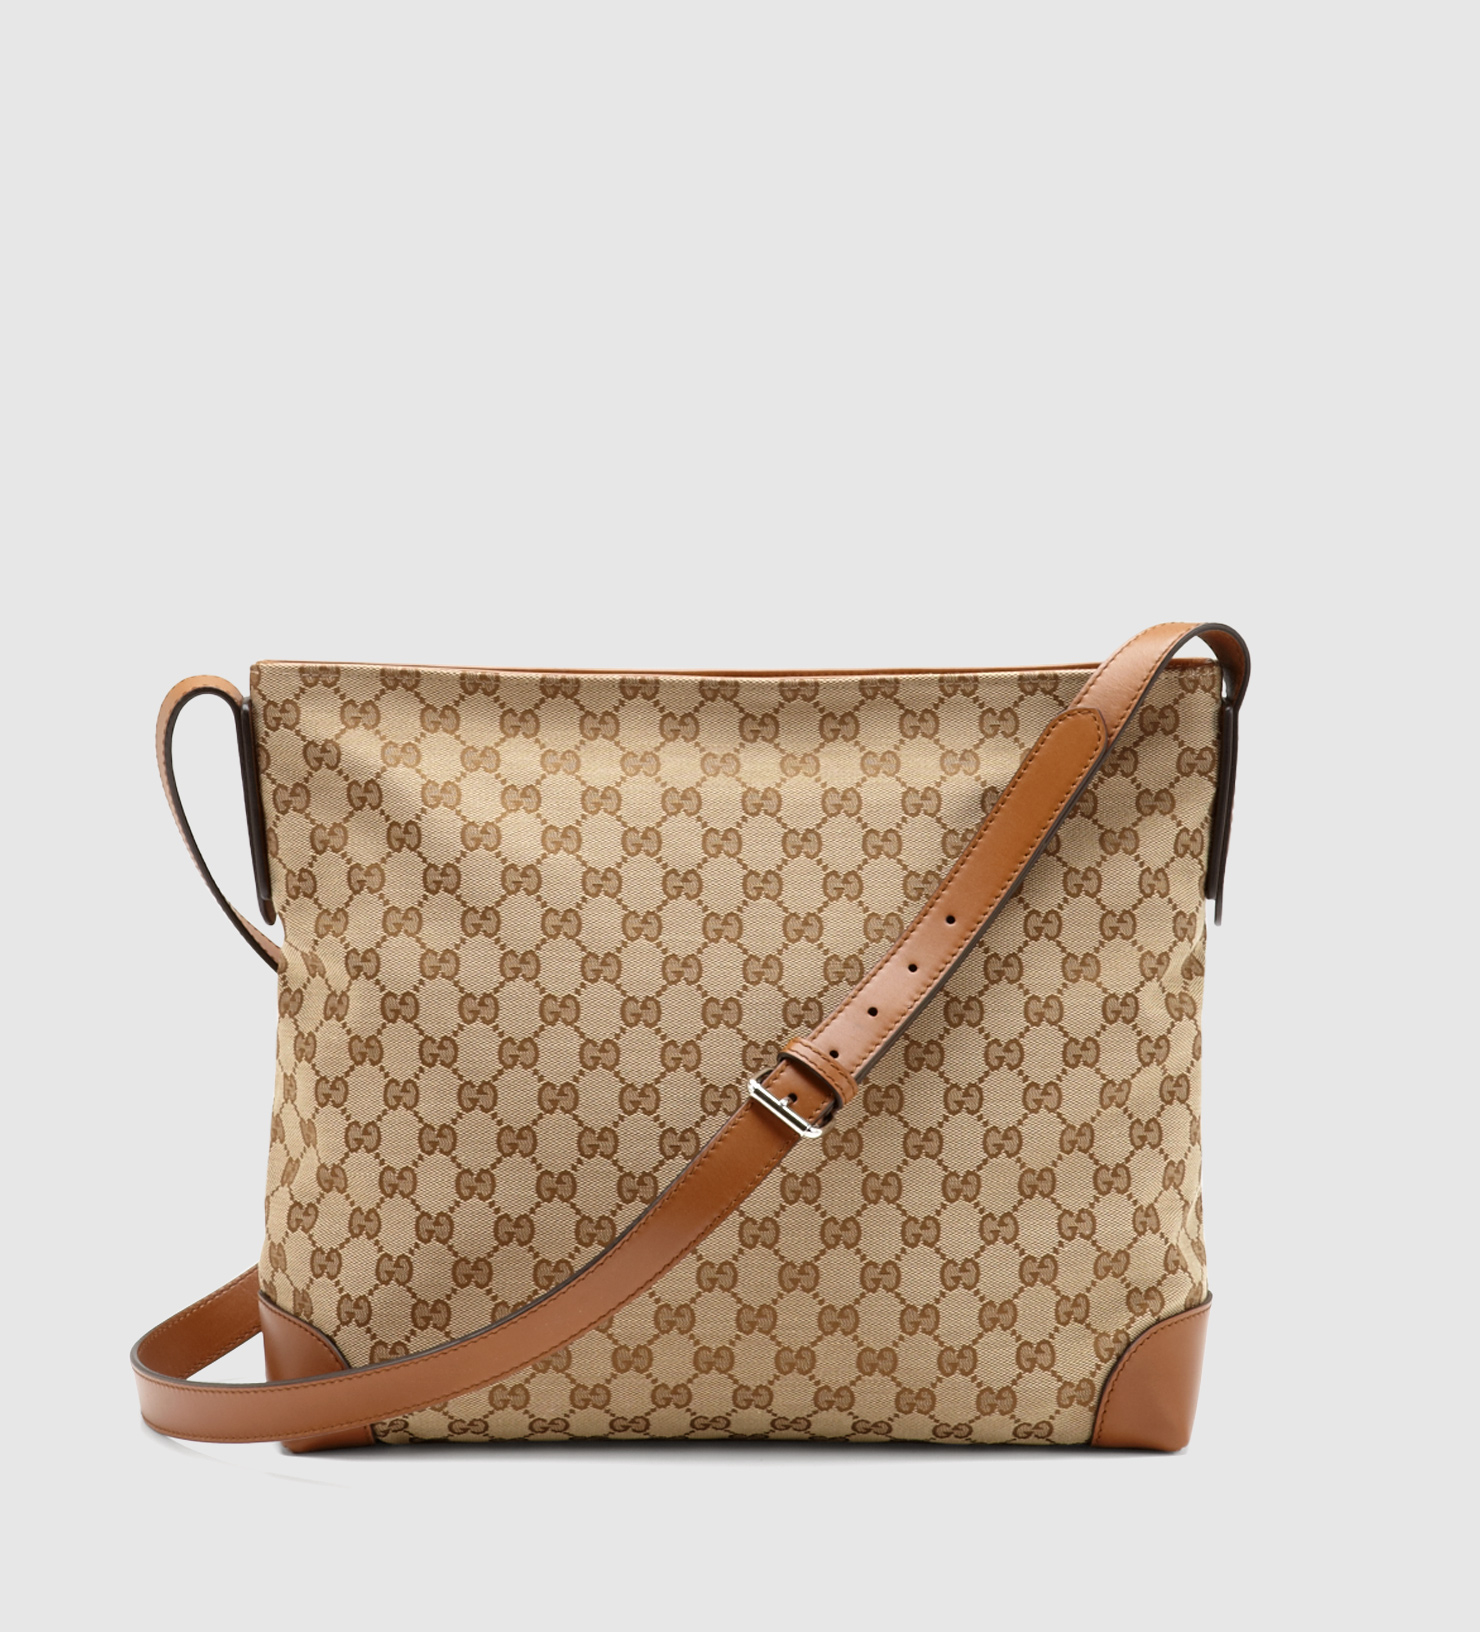 Gucci Large Original Gg Canvas Messenger Bag in Brown - Lyst